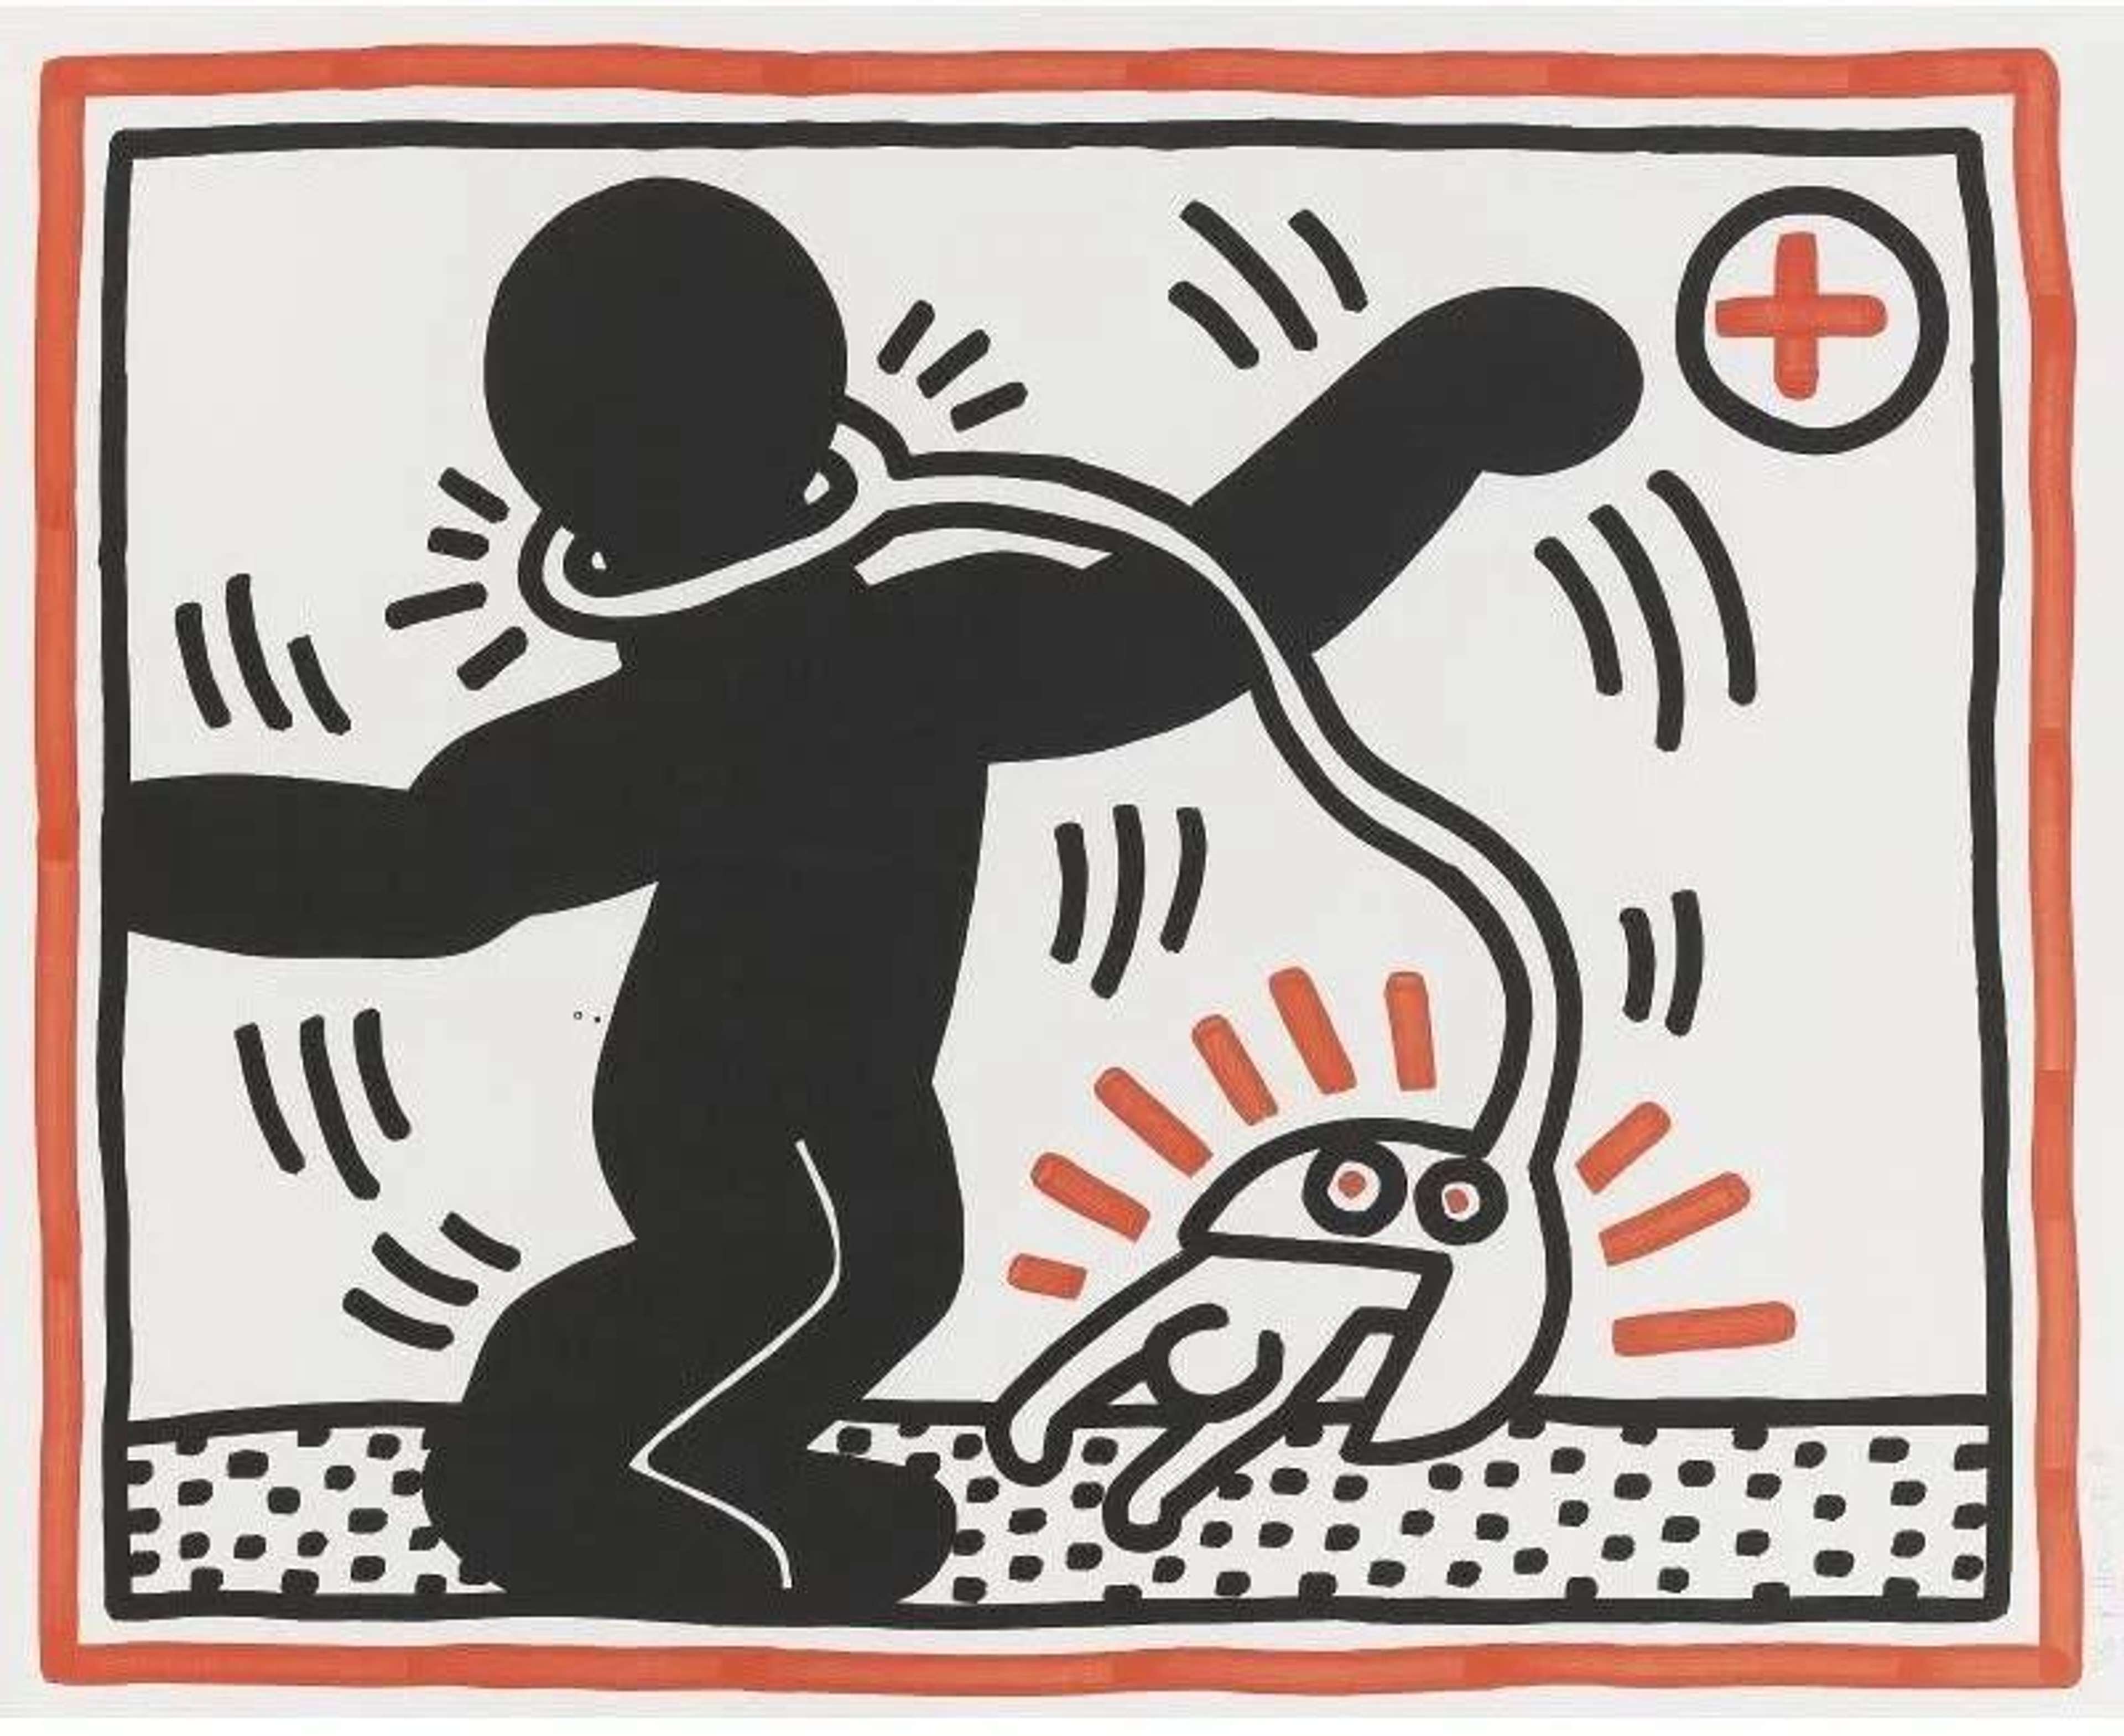 Keith Haring’s Free South Africa 1. A Pop Art screenprint of a black figure raising its foot, stepping on the outline of a white figure.